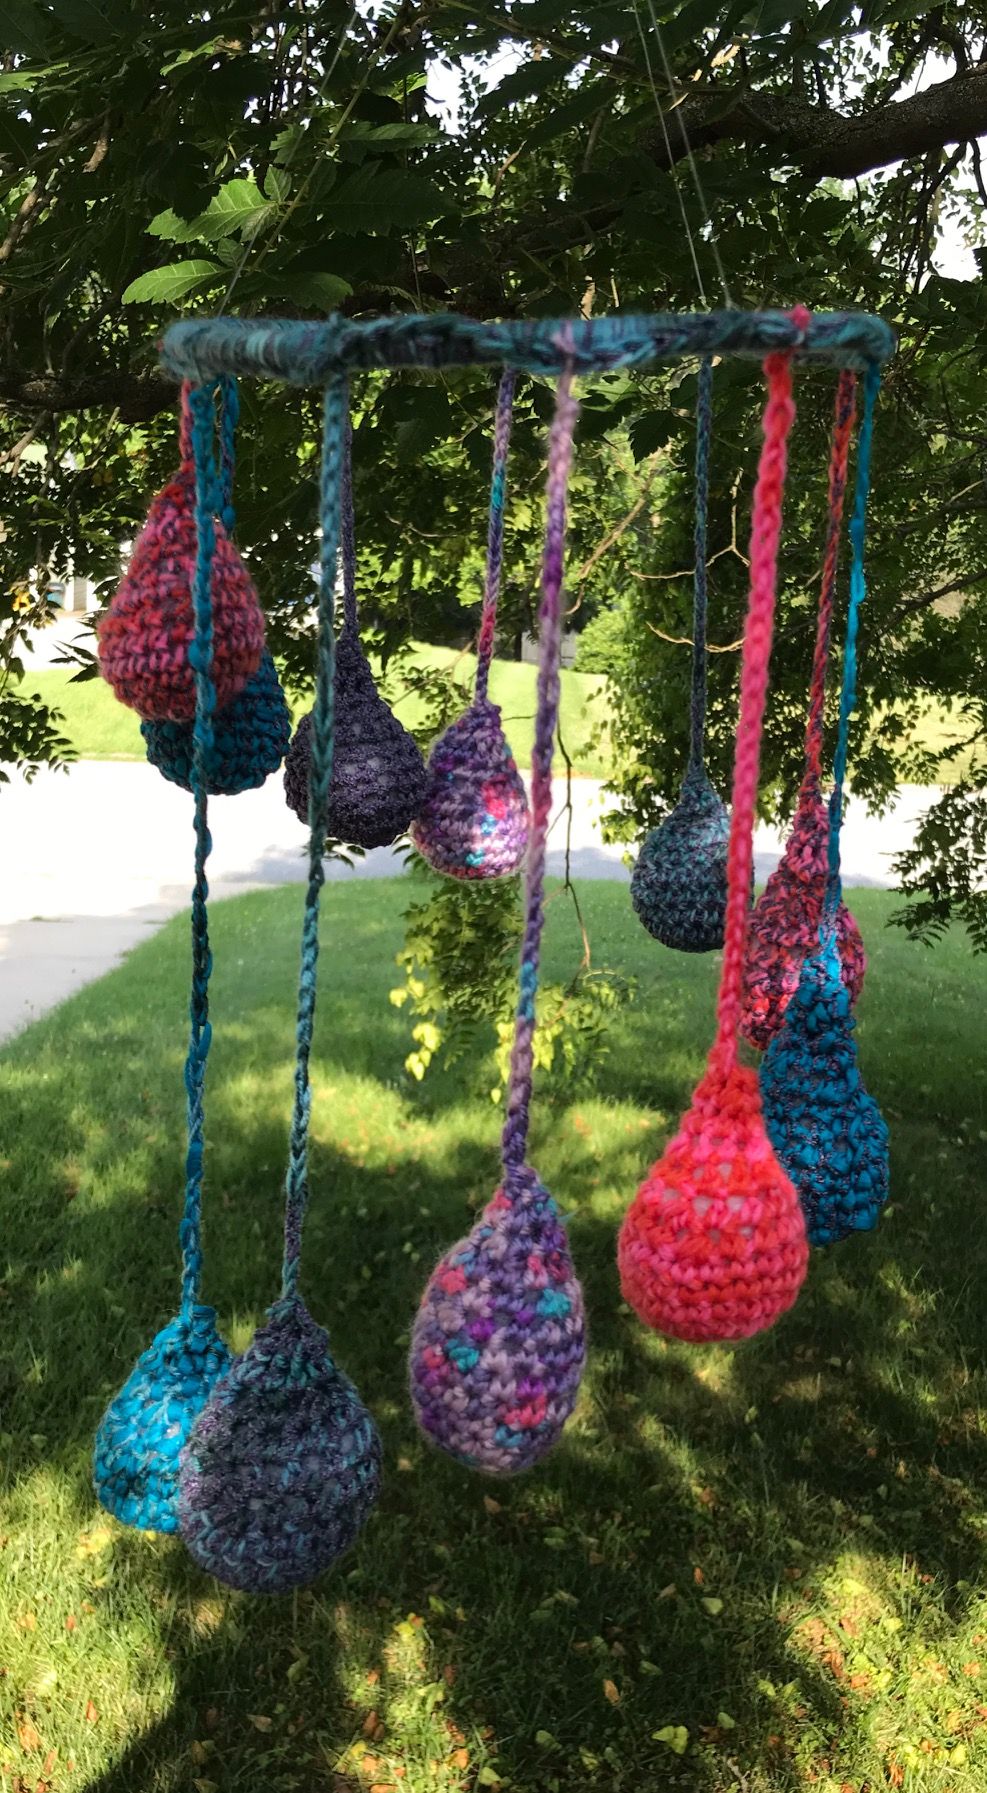 Hanging Mobile Raindrops Teardrops in Blues Purples and Pinks